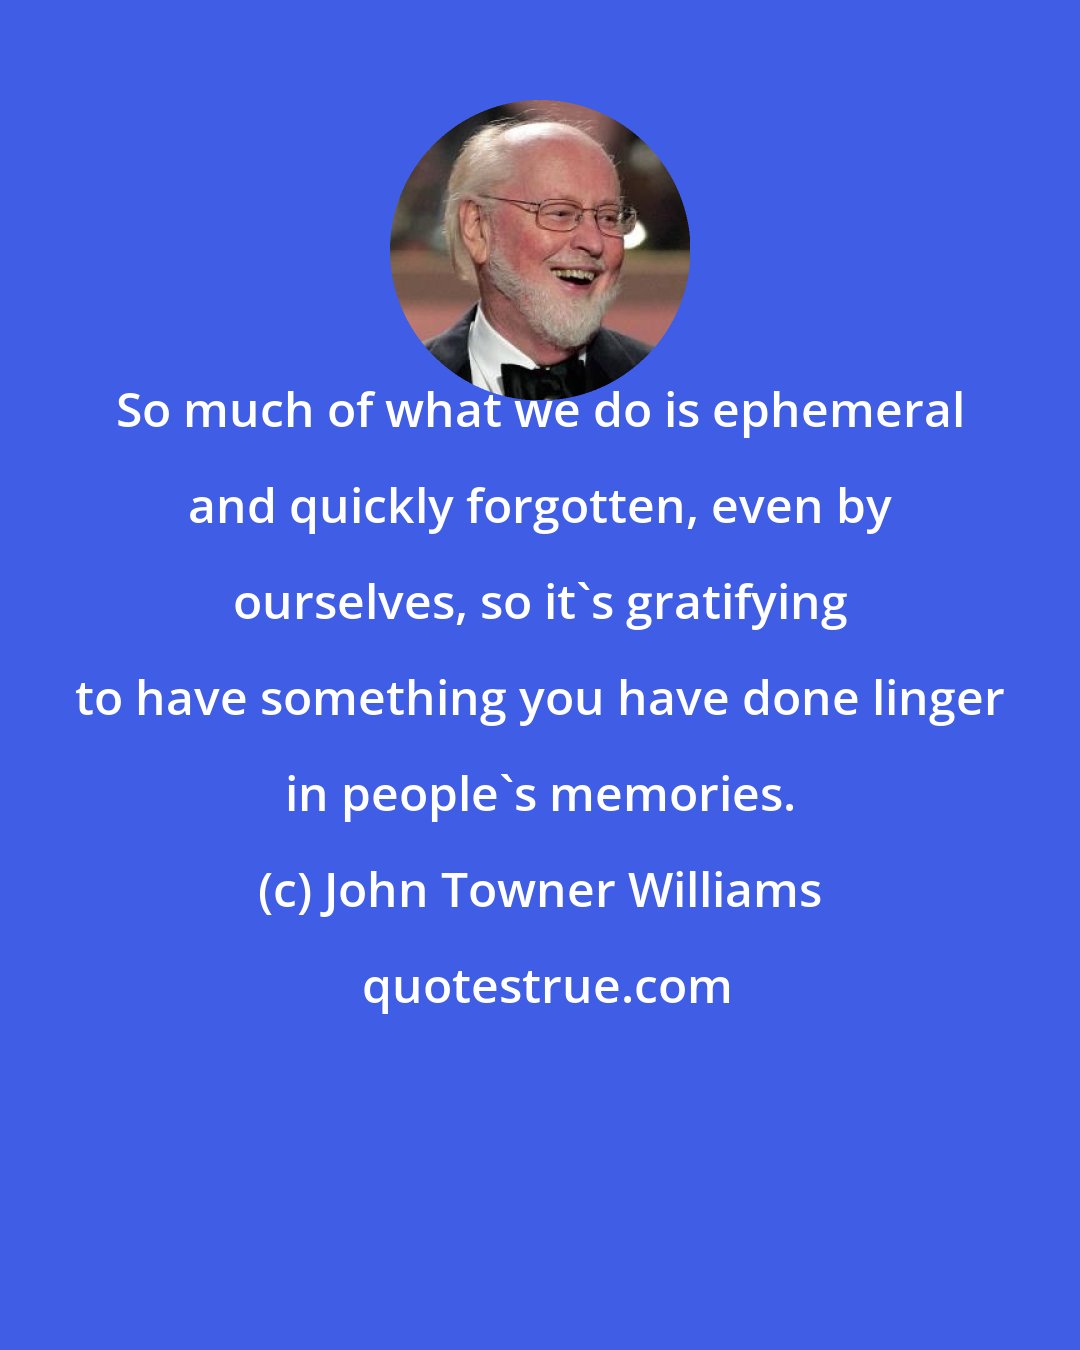 John Towner Williams: So much of what we do is ephemeral and quickly forgotten, even by ourselves, so it's gratifying to have something you have done linger in people's memories.